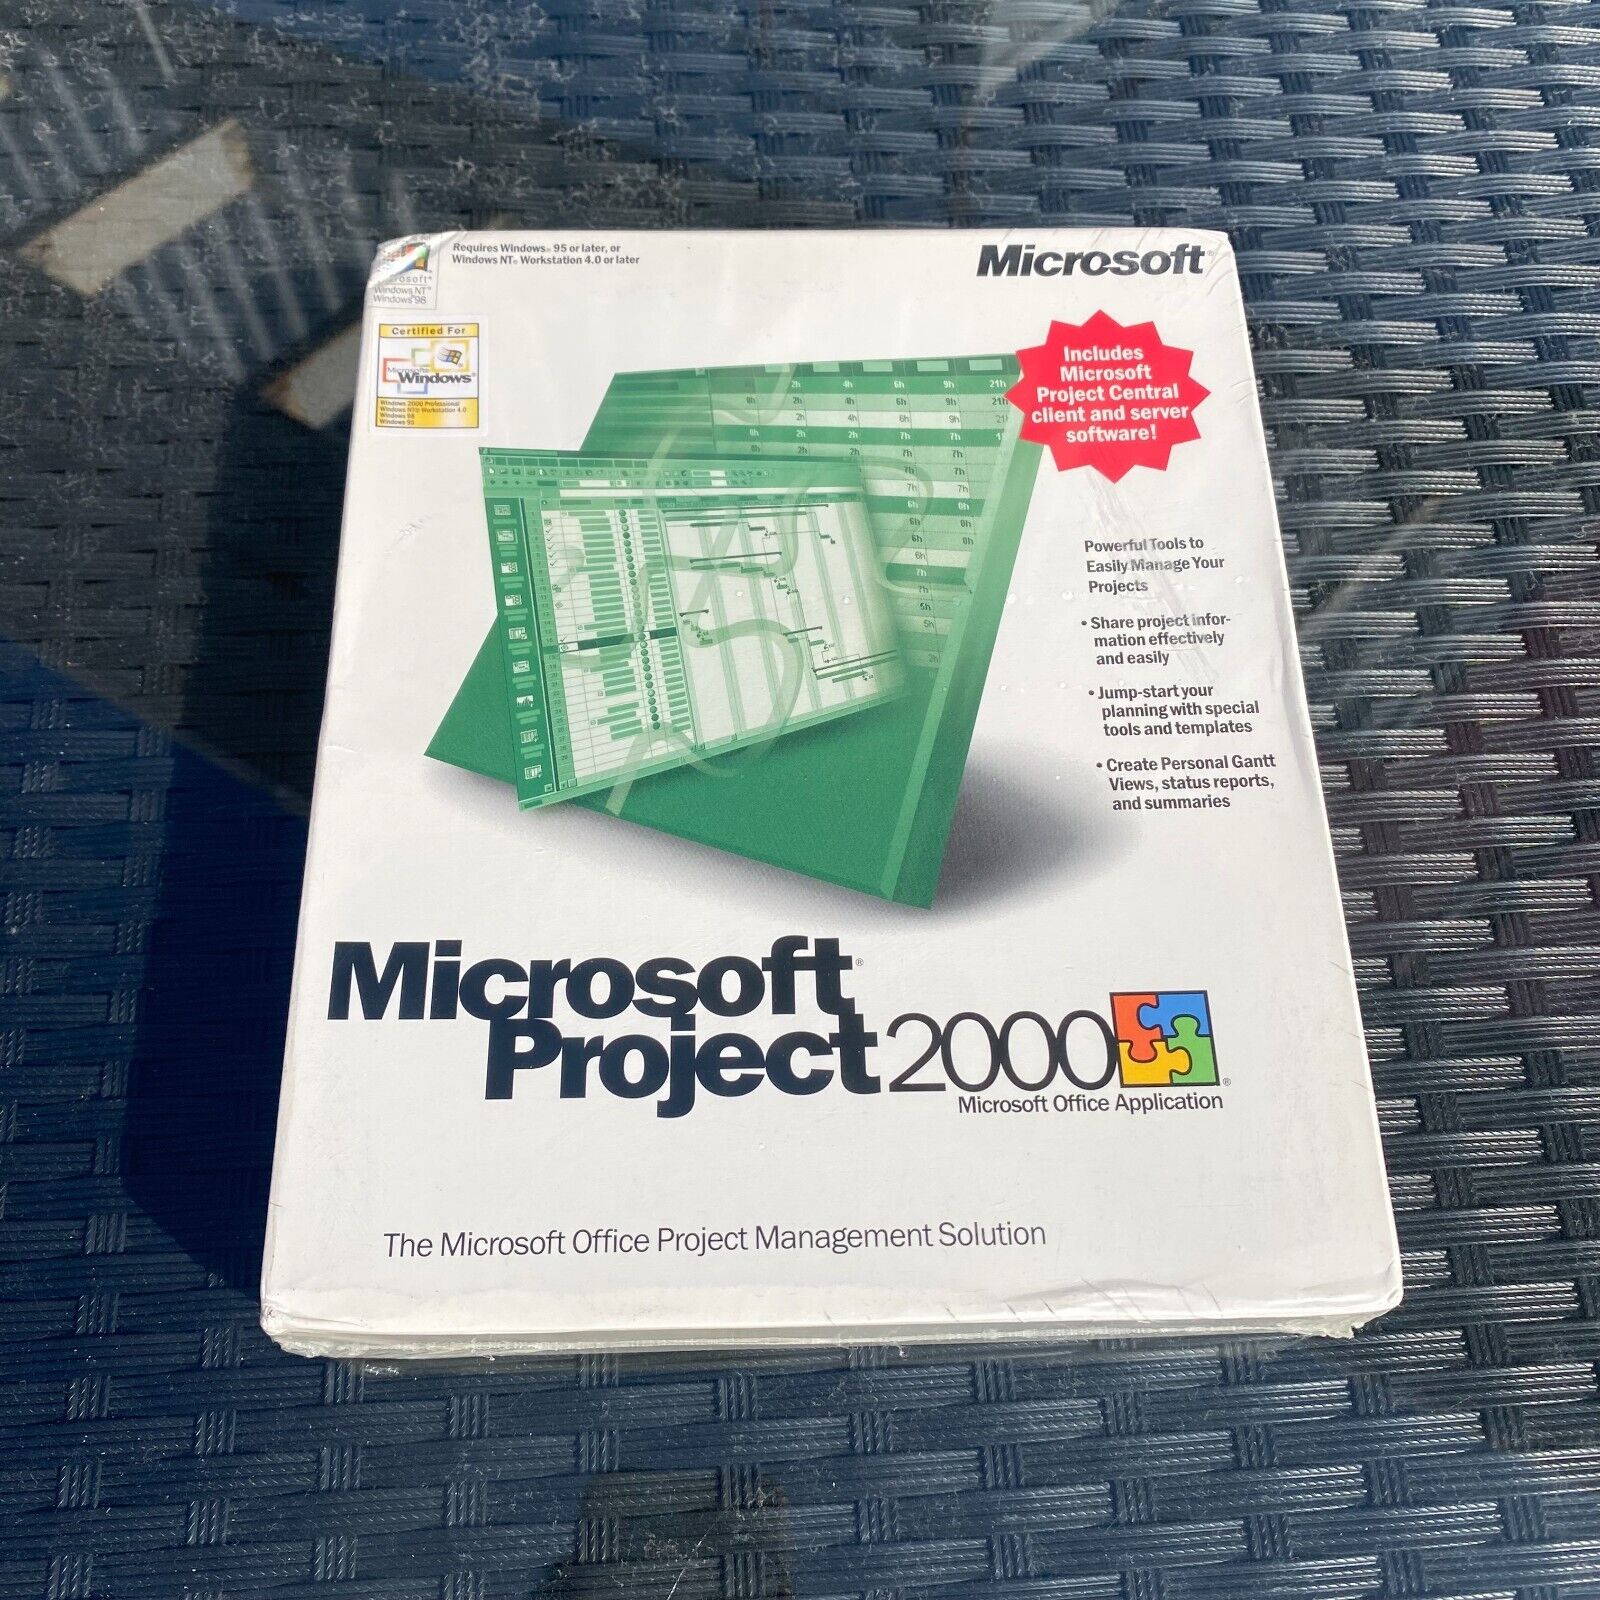 MICROSOFT PROJECT 2000 INCLUDES PROJECT CENTRAL CLIENT AND SERVER SOFTWARE 